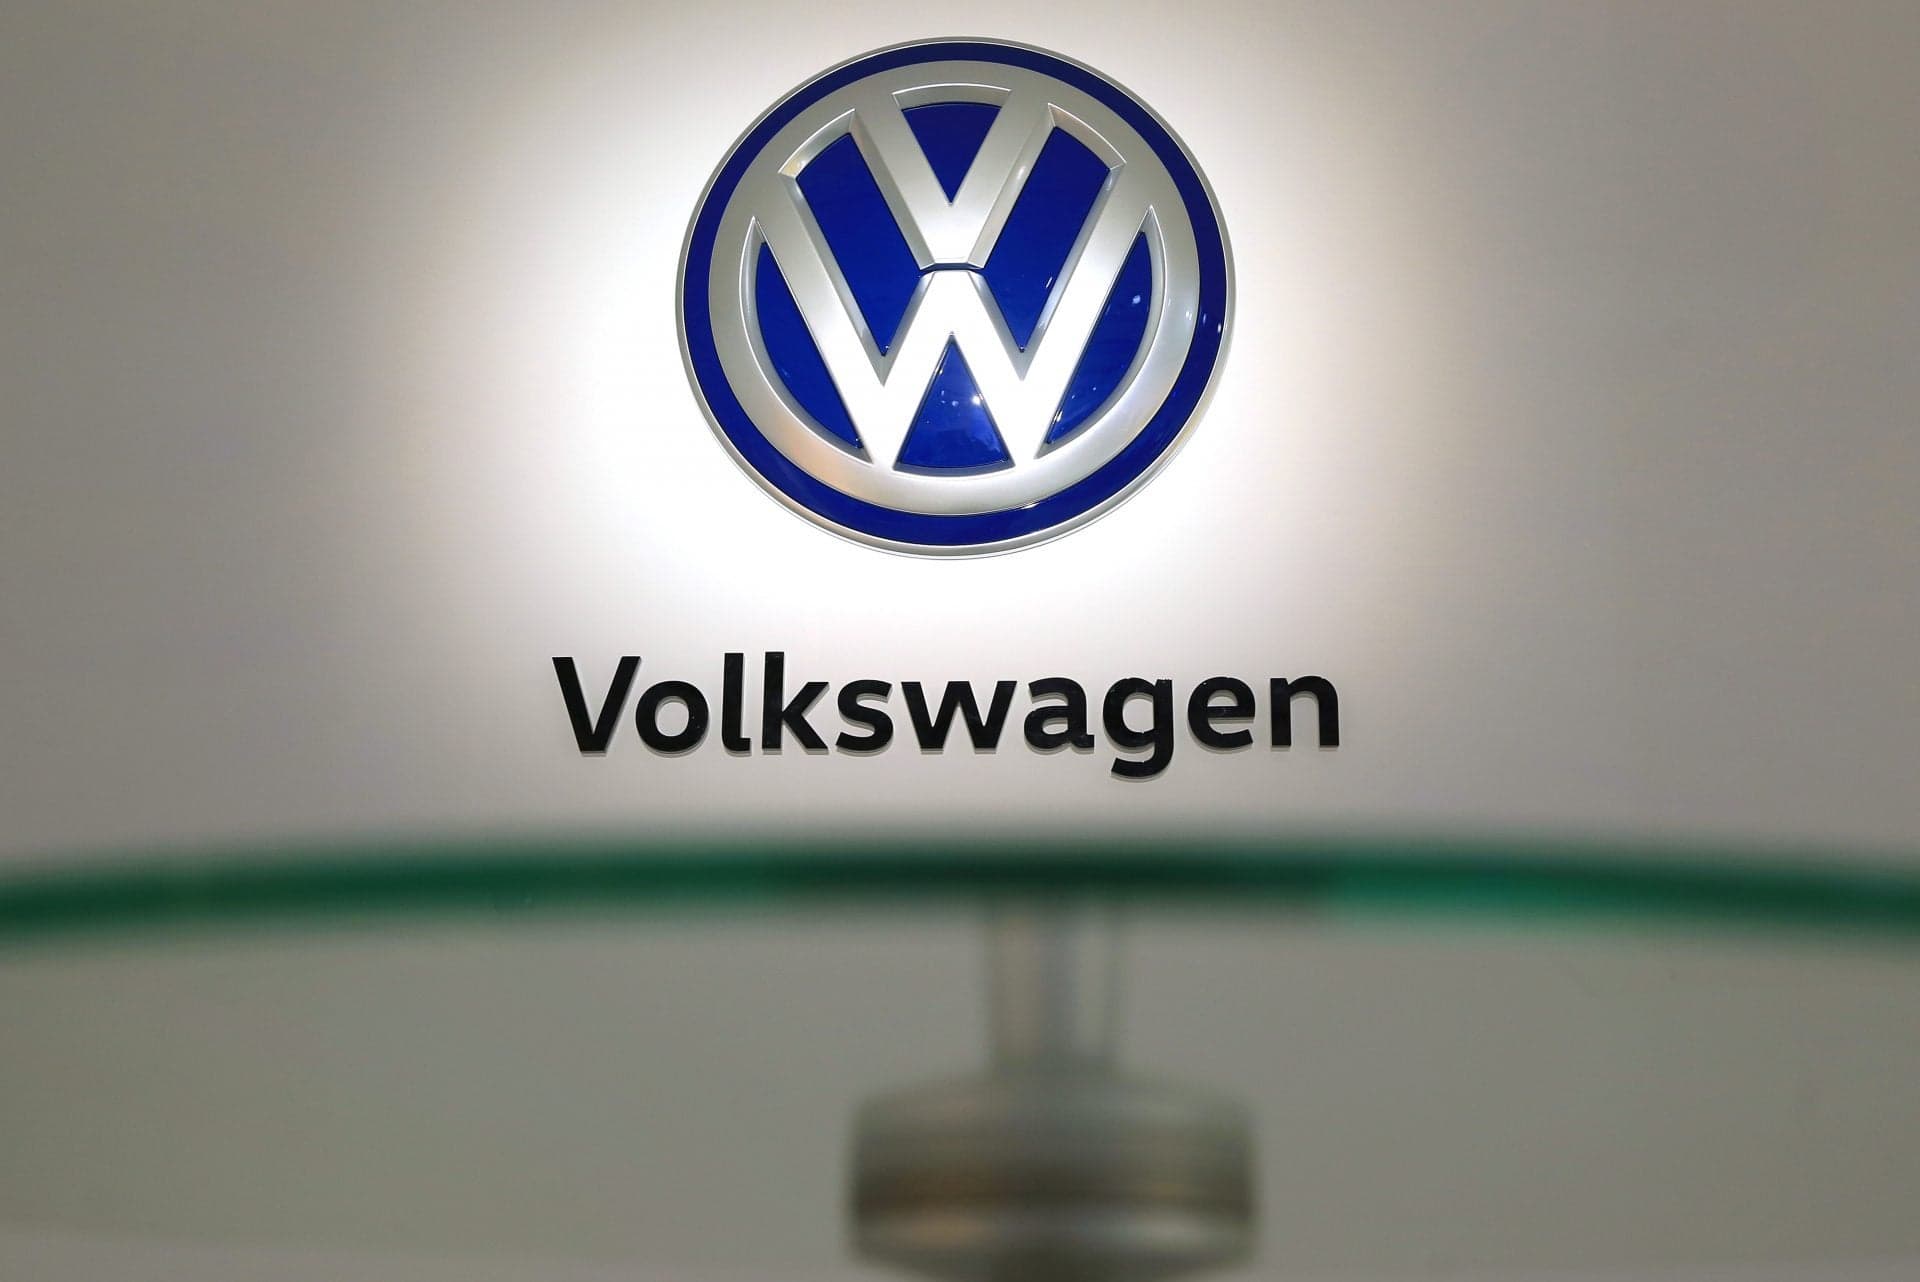 BREAKING: Volkswagen Pleads Guilty to Three Felony Accounts Related to Emissions Cheating